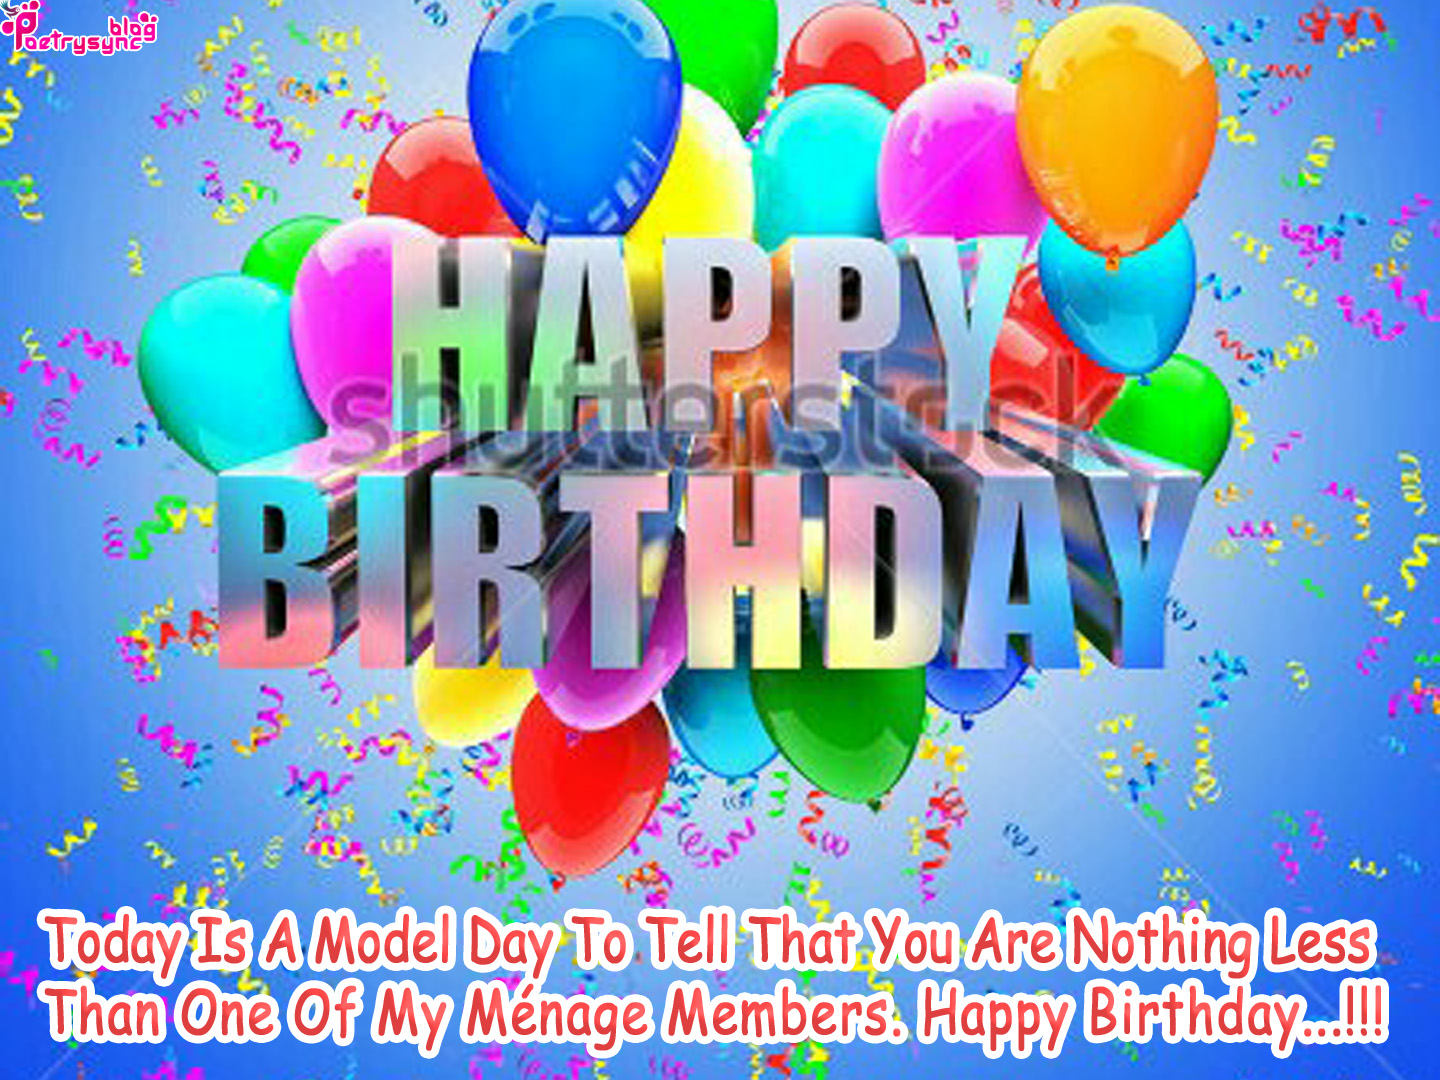 Happy Birthday Card Images with English Quotes for Friend | Poetry